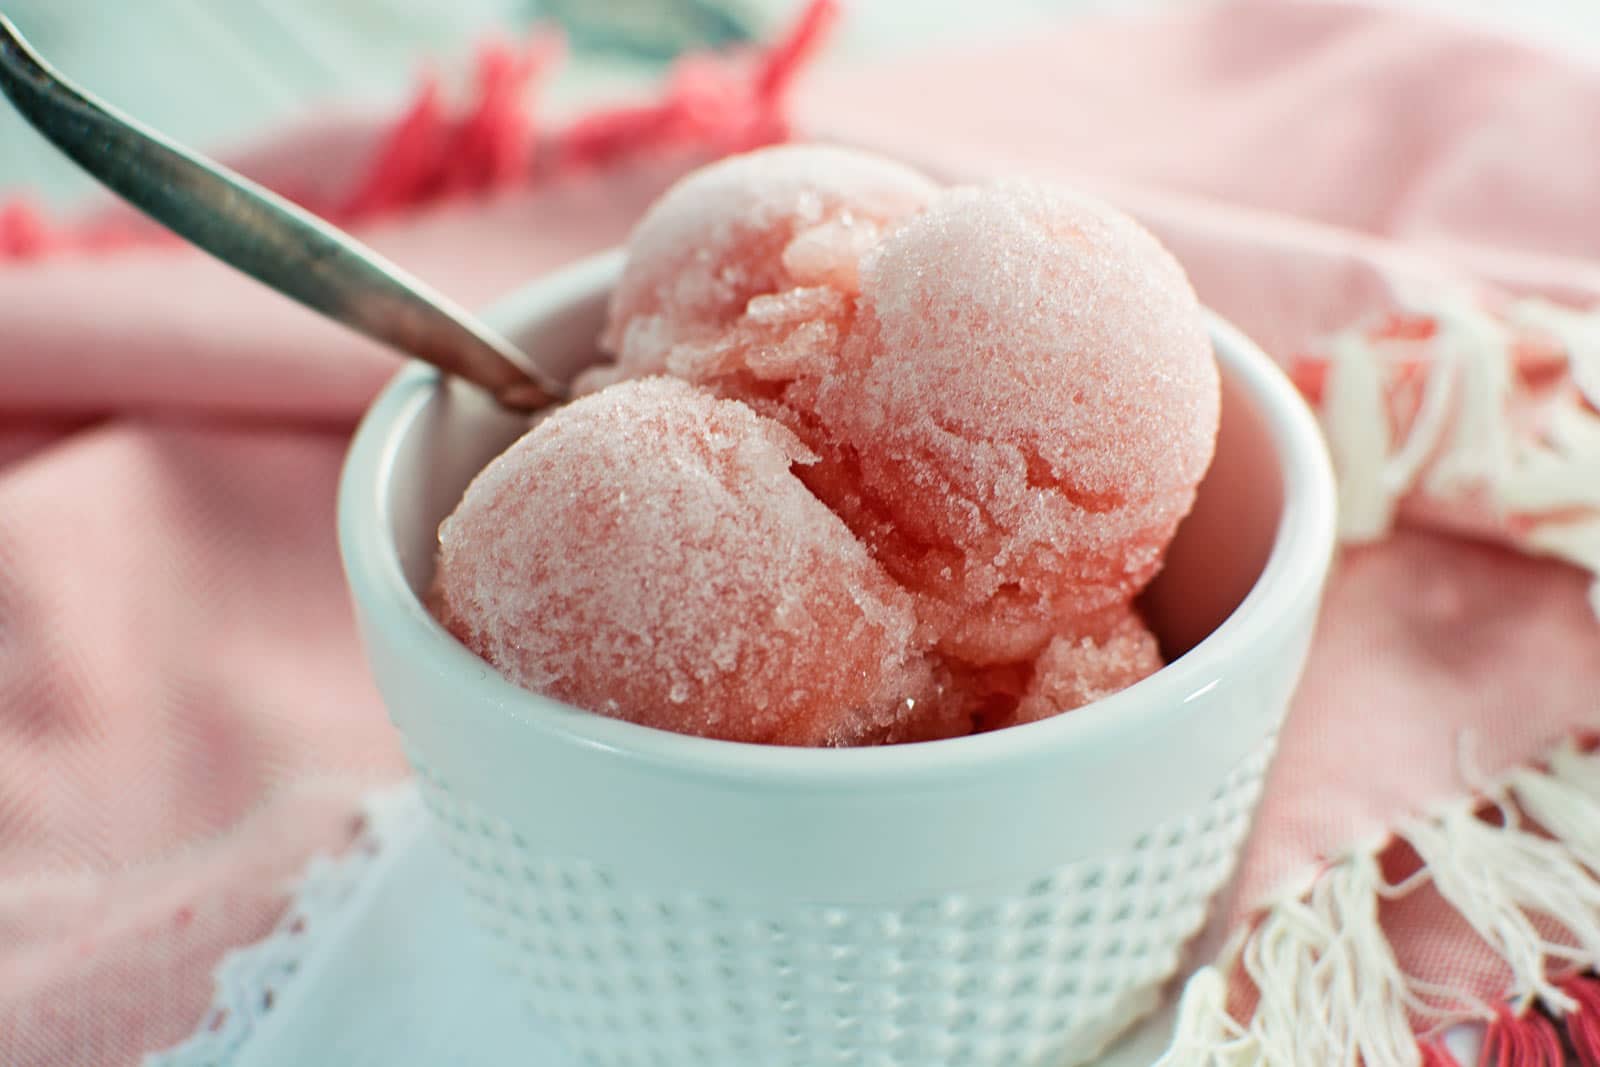 So summery and refreshing, Watermelon Sorbet! Easy to make and a favorite. Find the recipe @LittleFiggyFood